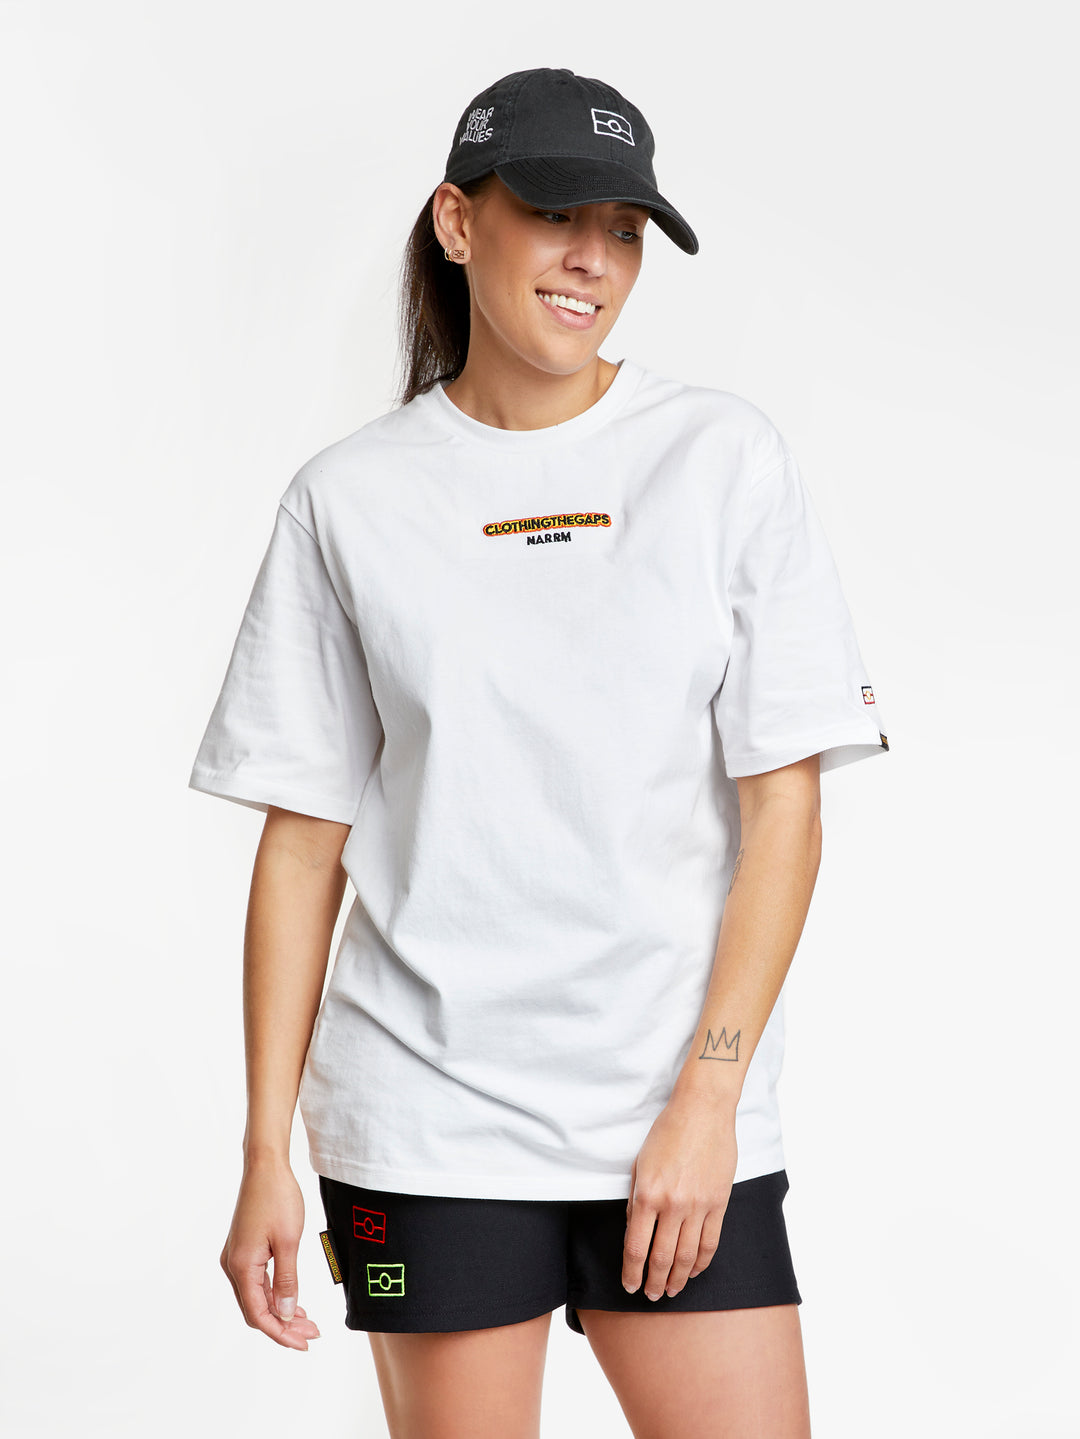 Clothing The Gaps. Wear Your Values Empty Flag Cap 2.0. Black adjustable cap. With embroidered white outline of aboriginal flag on front. 'Wear your values' text embroidered on side of cap in white. Clothing The Gaps embroidered on back in white stitching. Adjustable clip strap on back with silver clip featuring Clothing The Gaps logo.